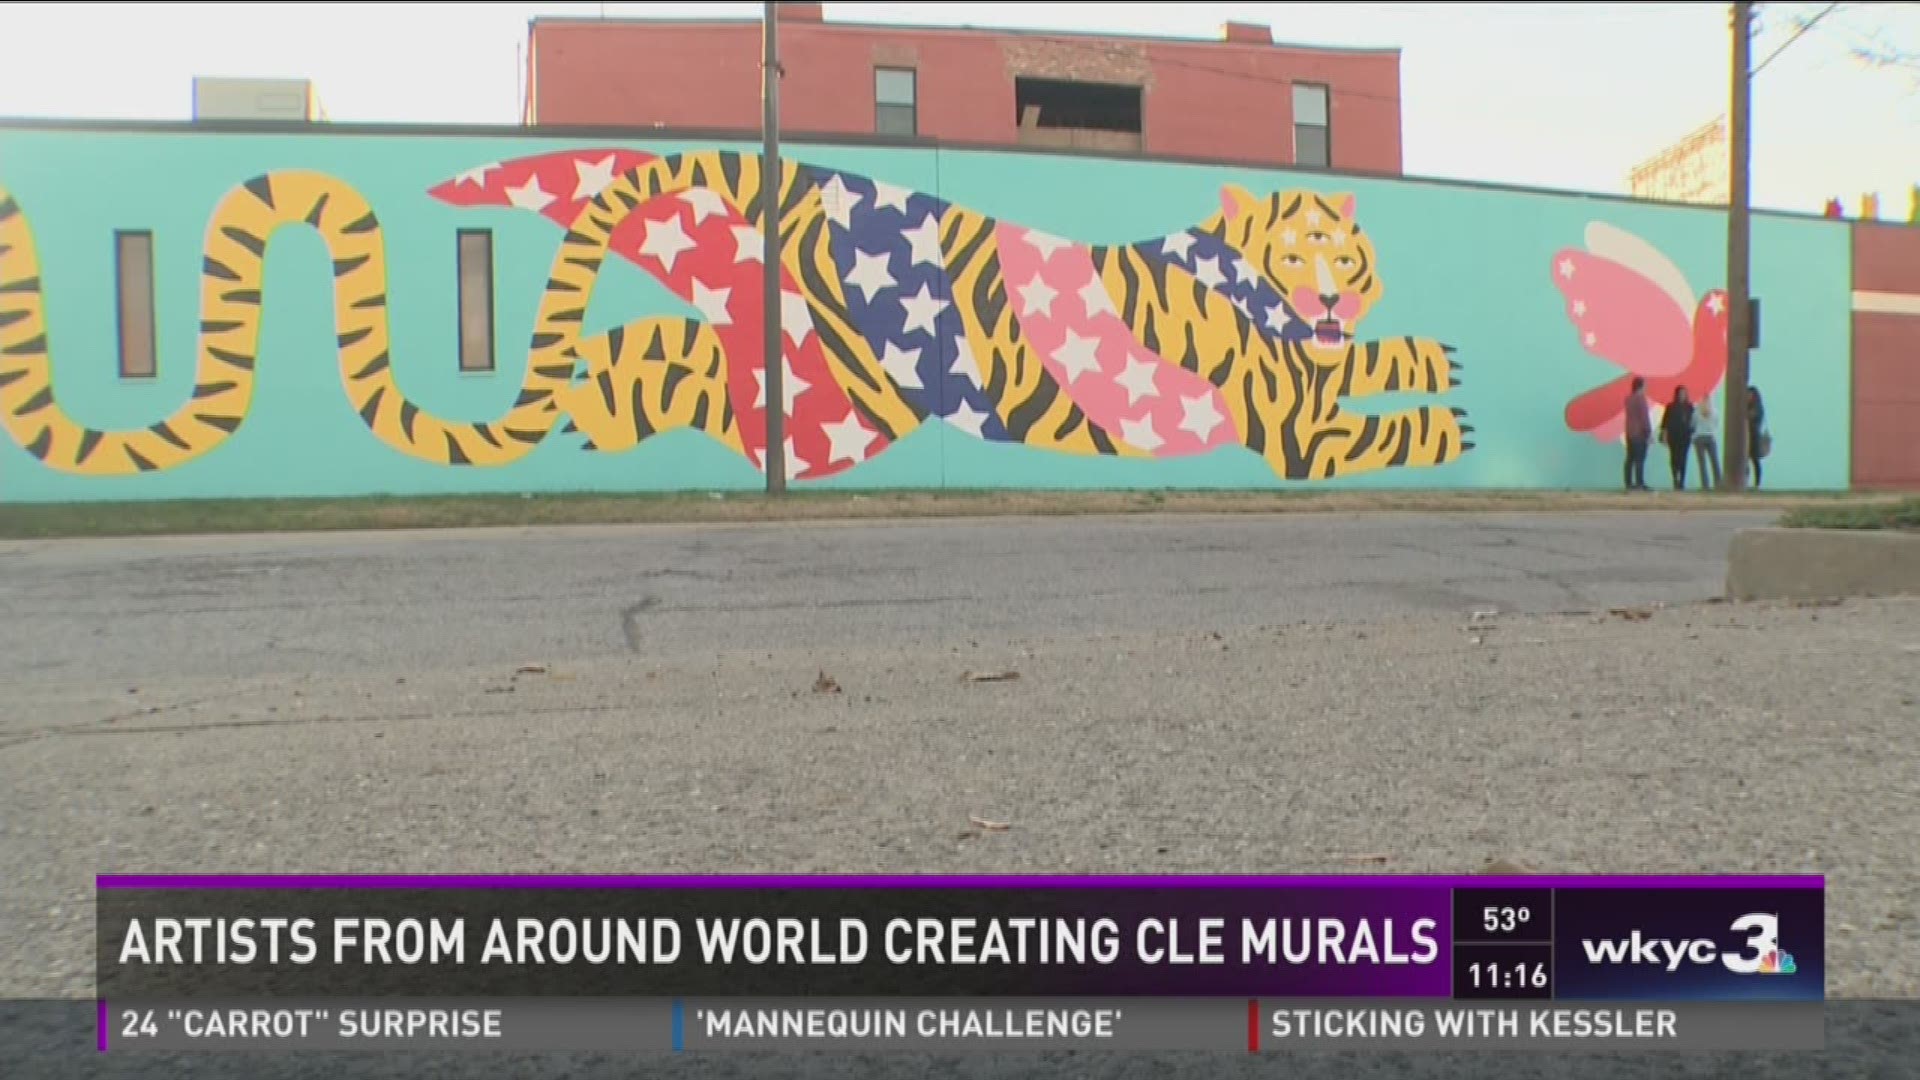 Artists from around the world creating cle murals